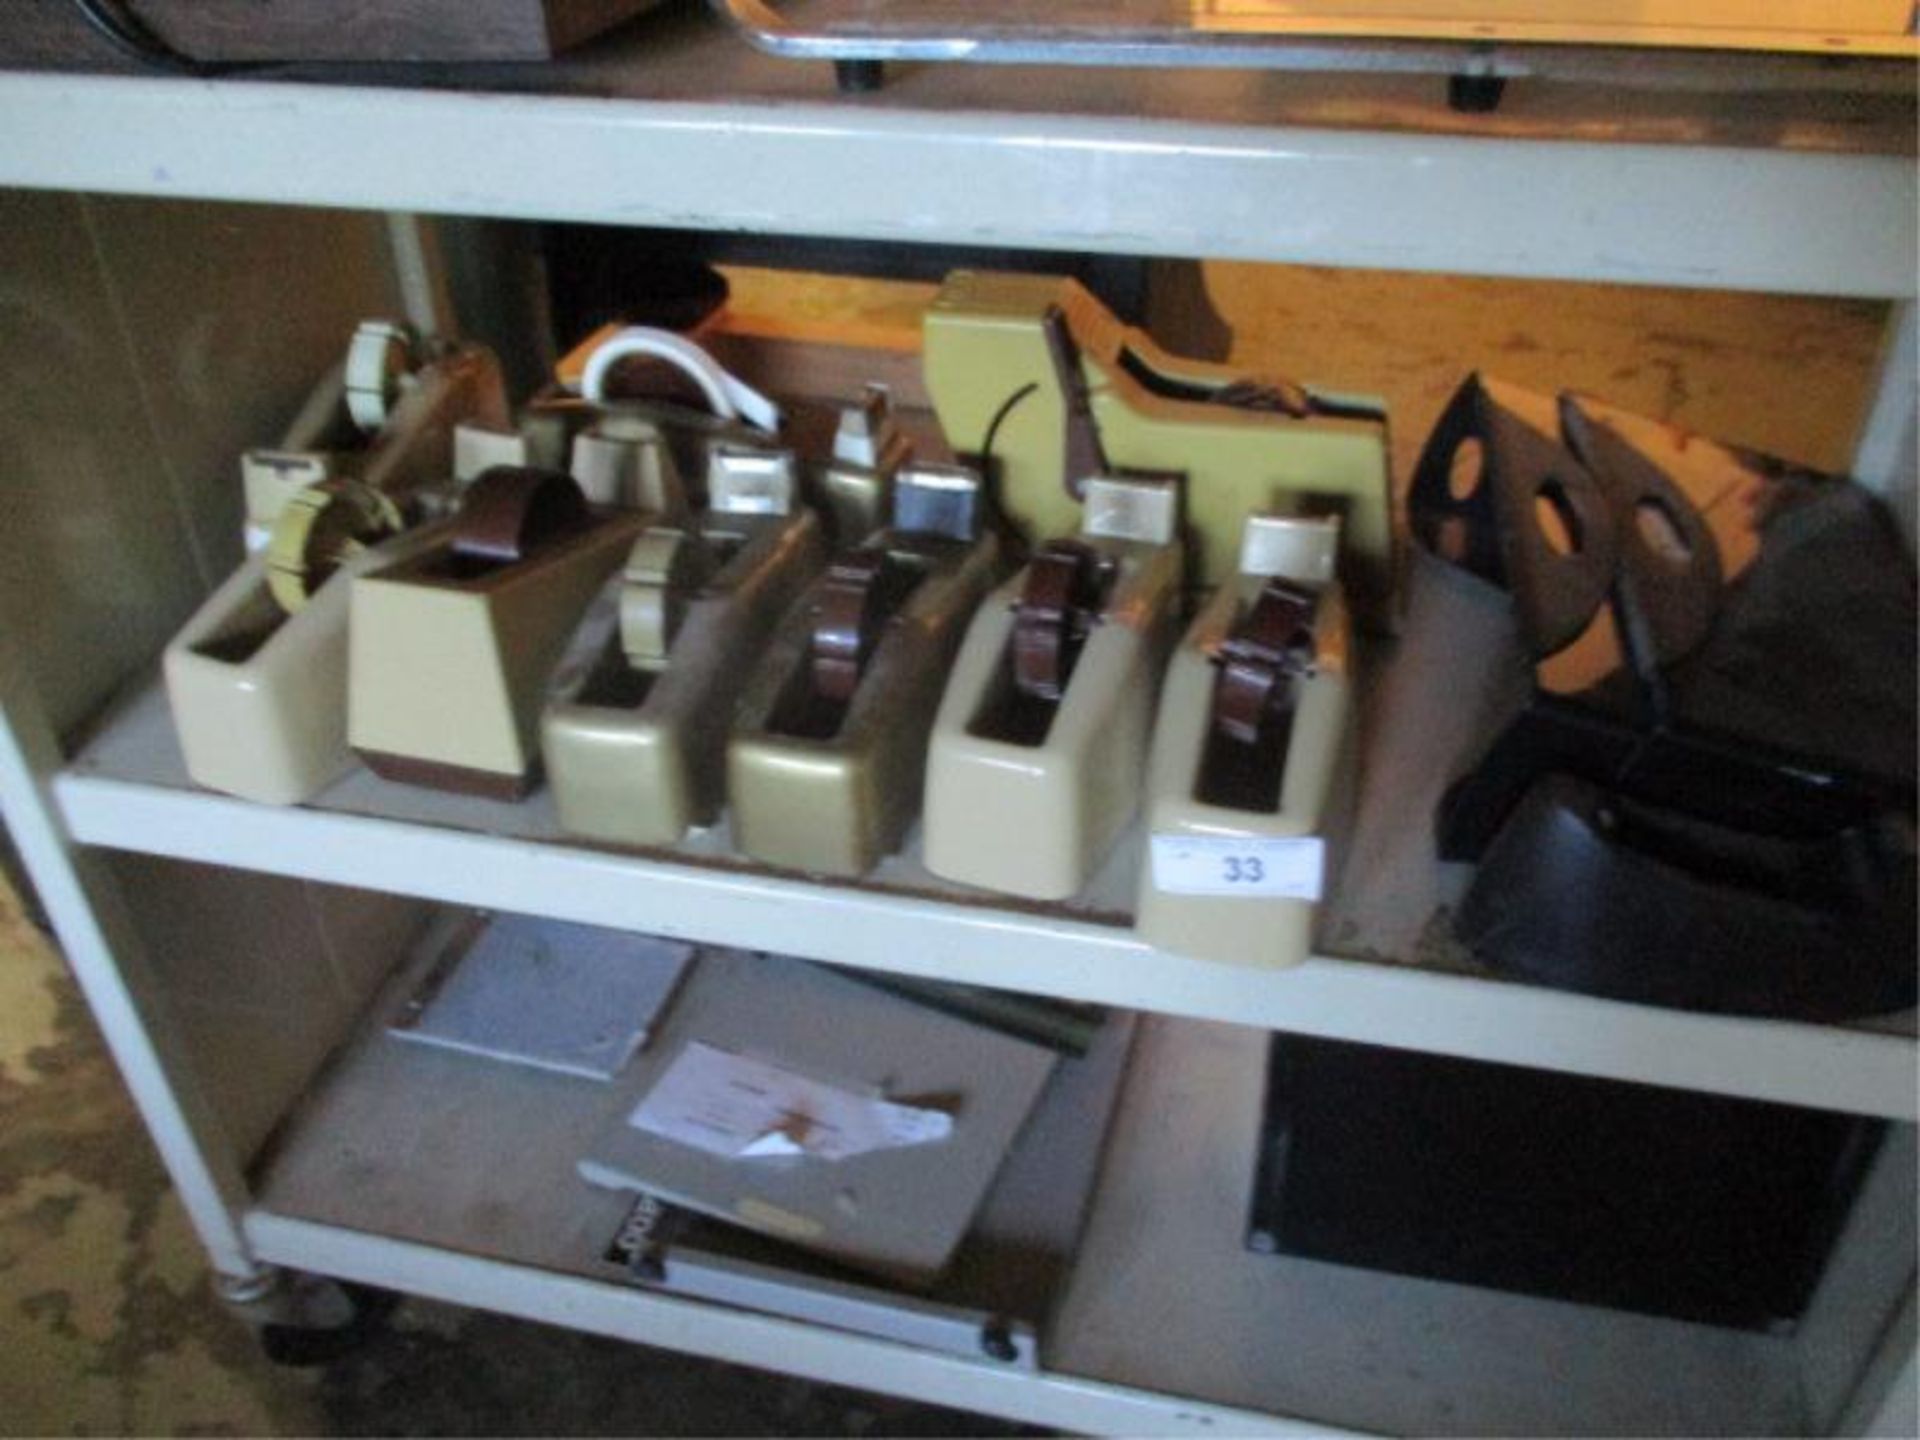 Lot of Tape Dispensers